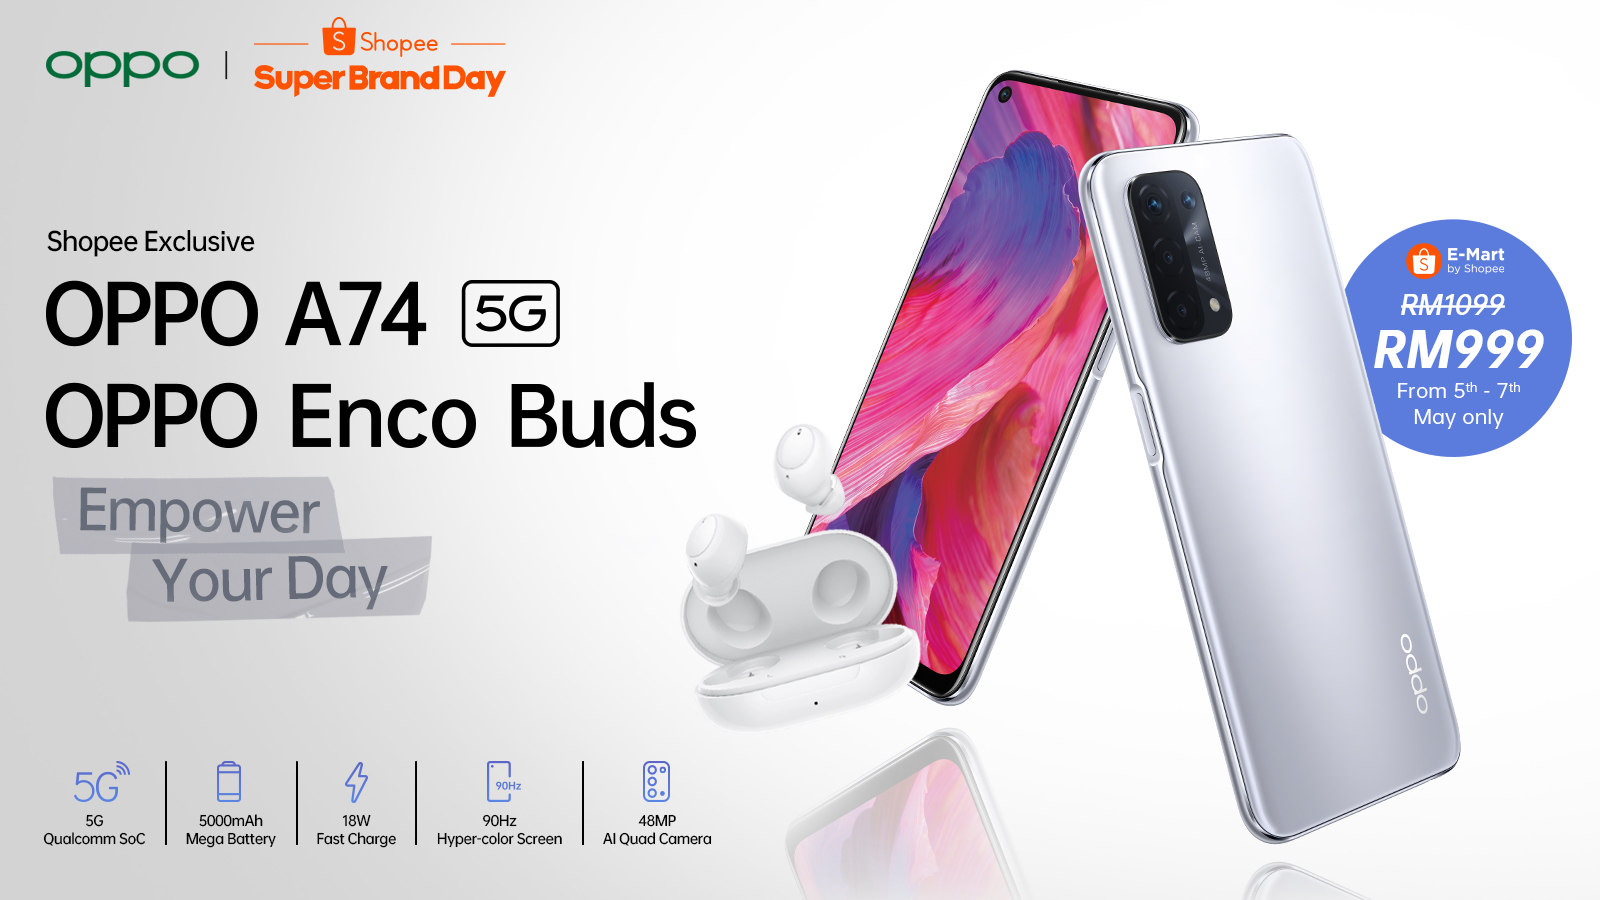 1 OPPO launches the A74 5G smartphone and Enco Buds exclusively on Shopee at its first regional Super Brand Day Sale